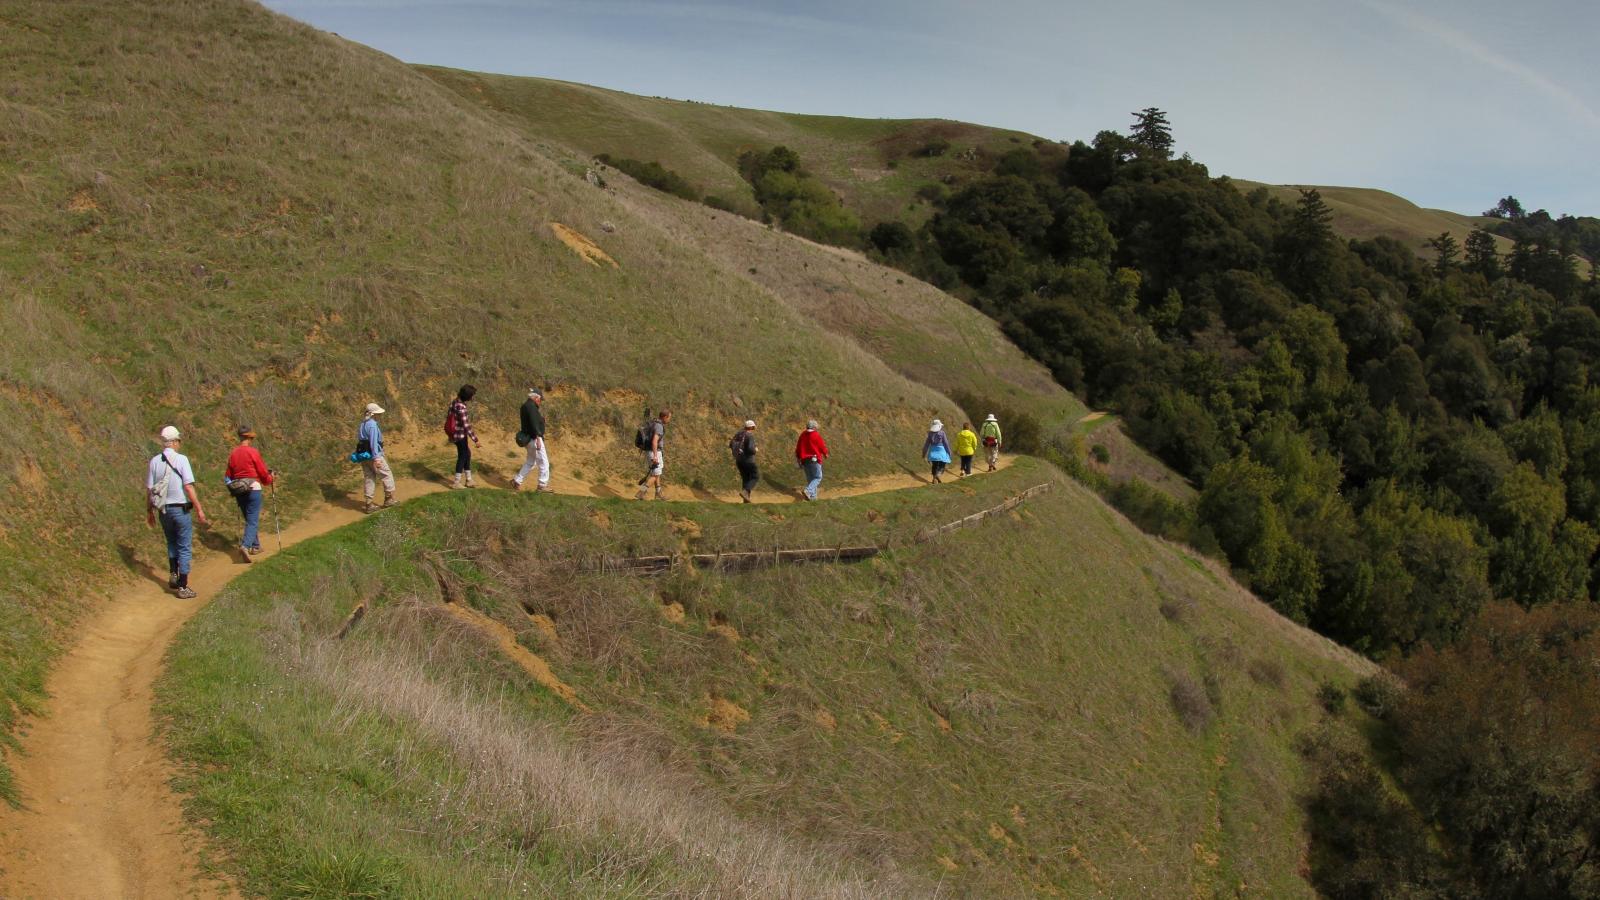 Hikers in Russian Ridge Open Space Preserve / photo by Lanette Otvos